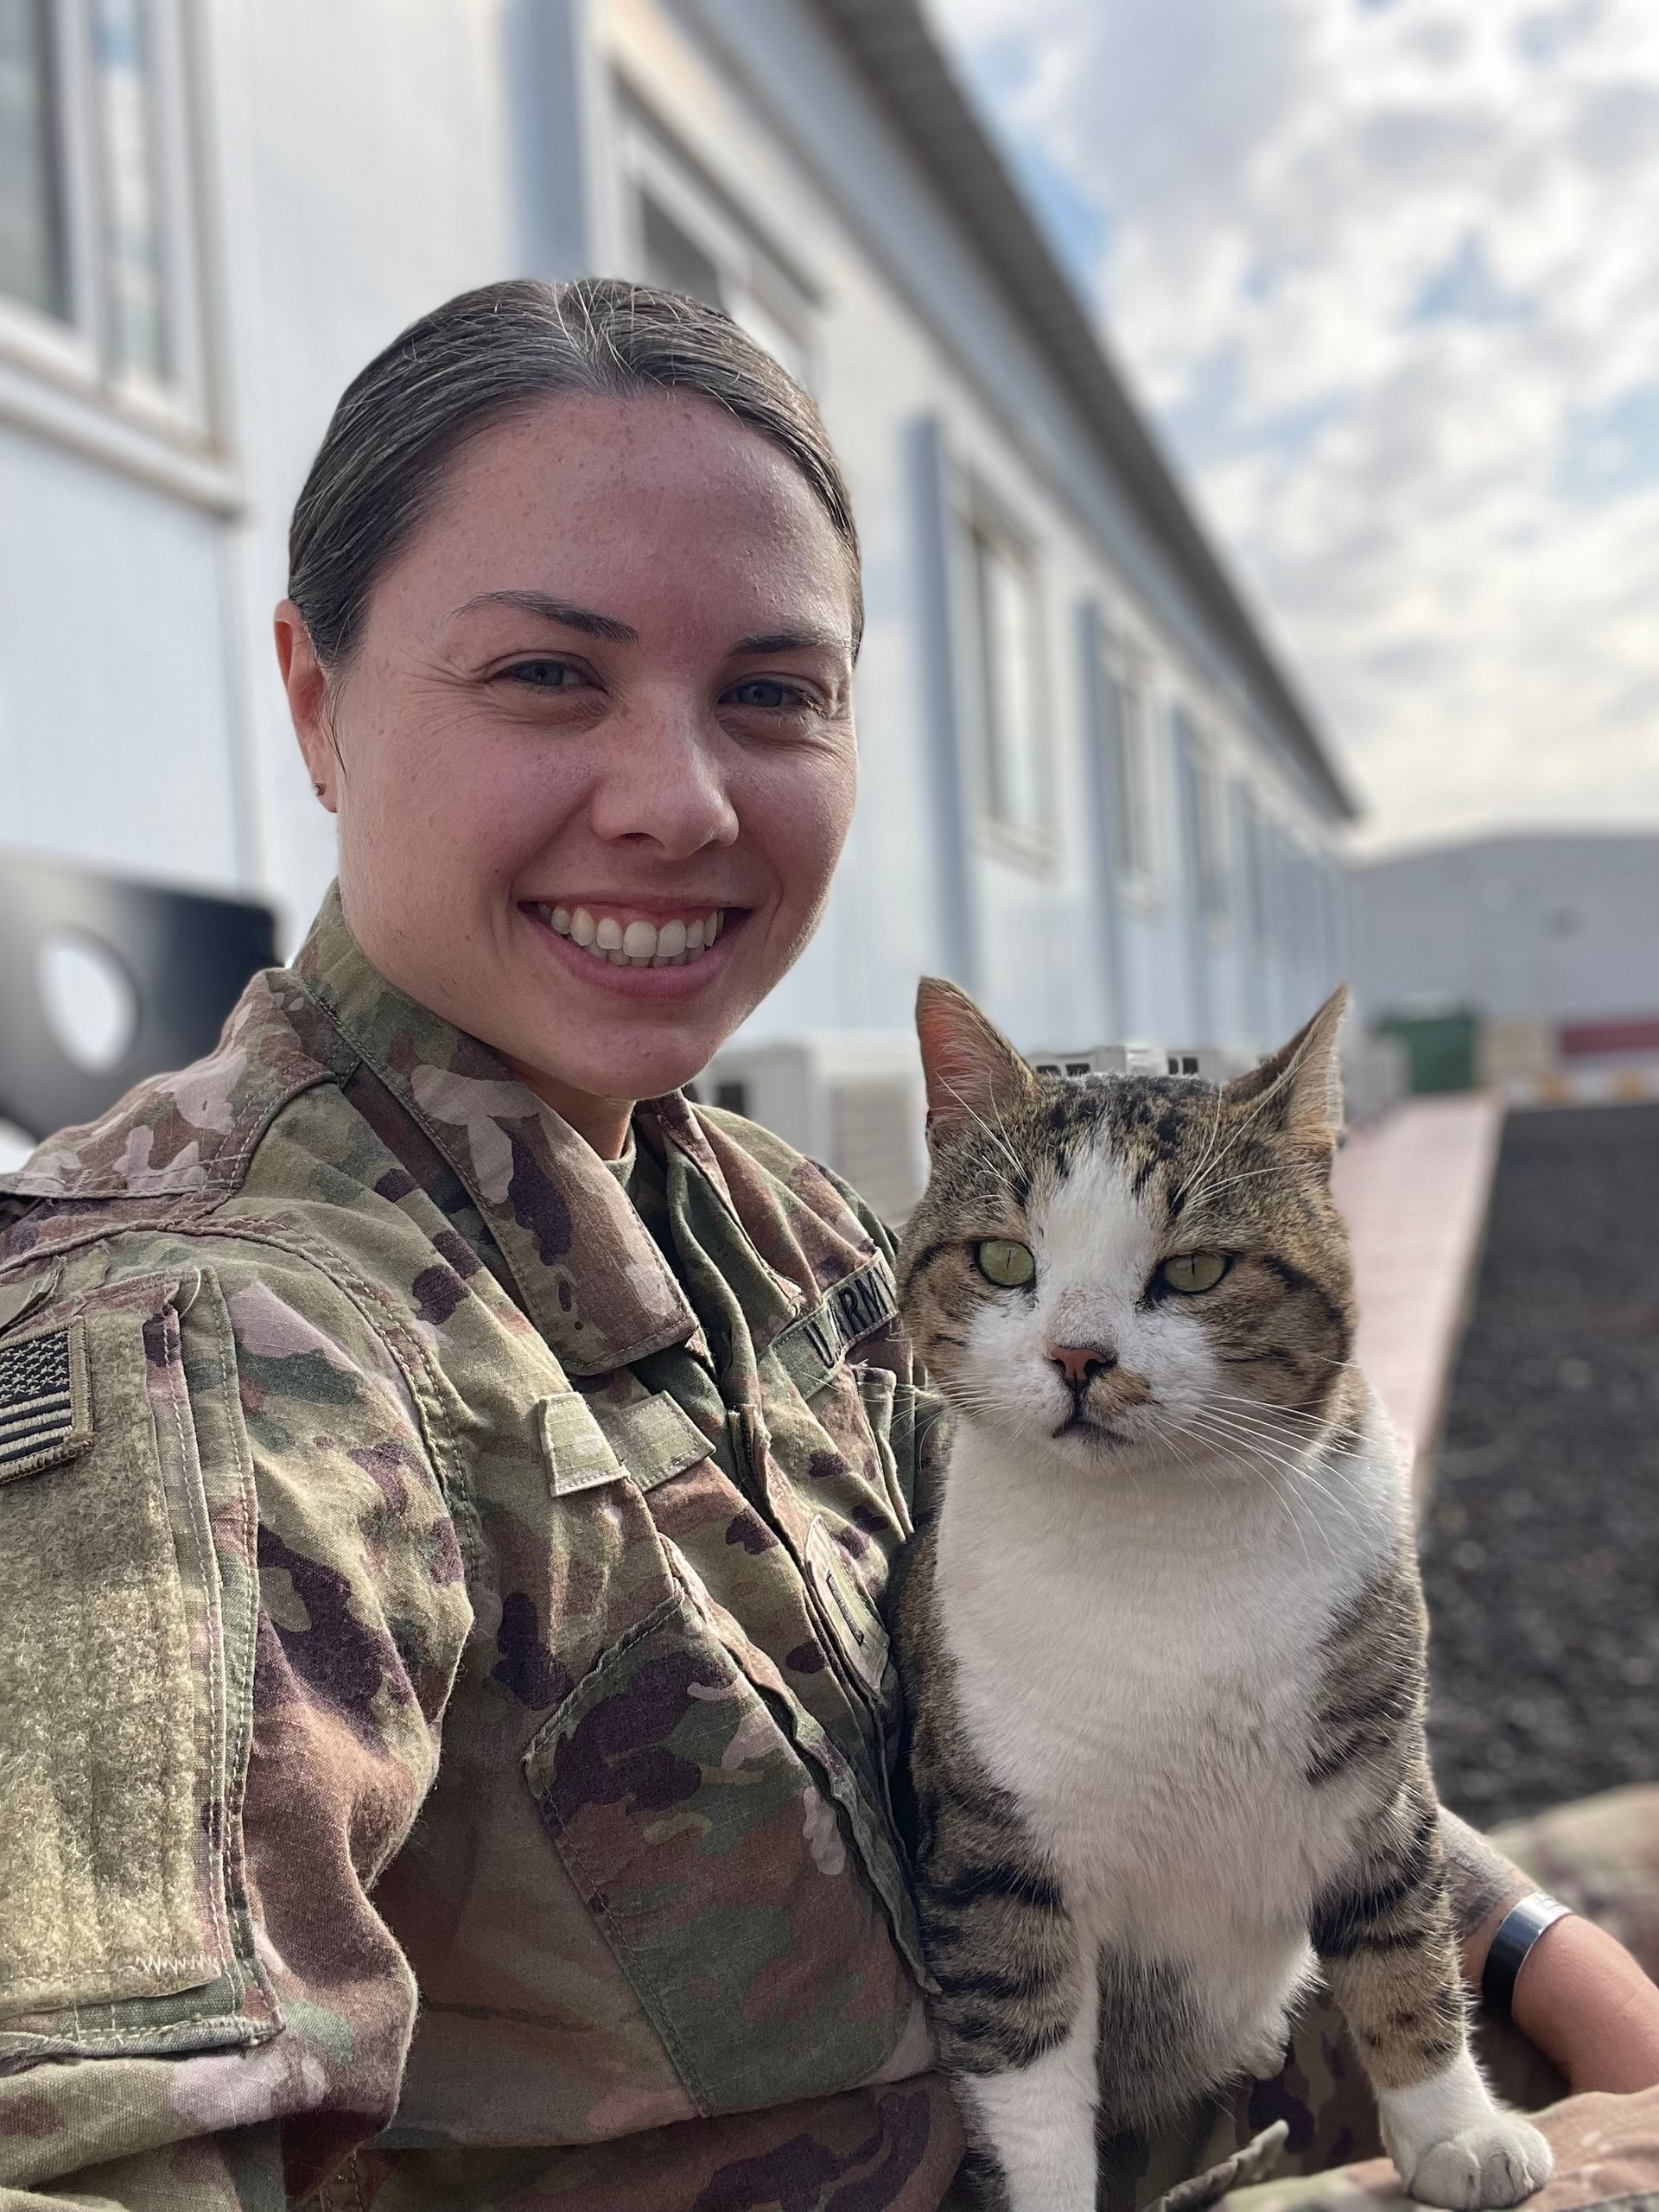 A woman in a military uniform is holding a cat